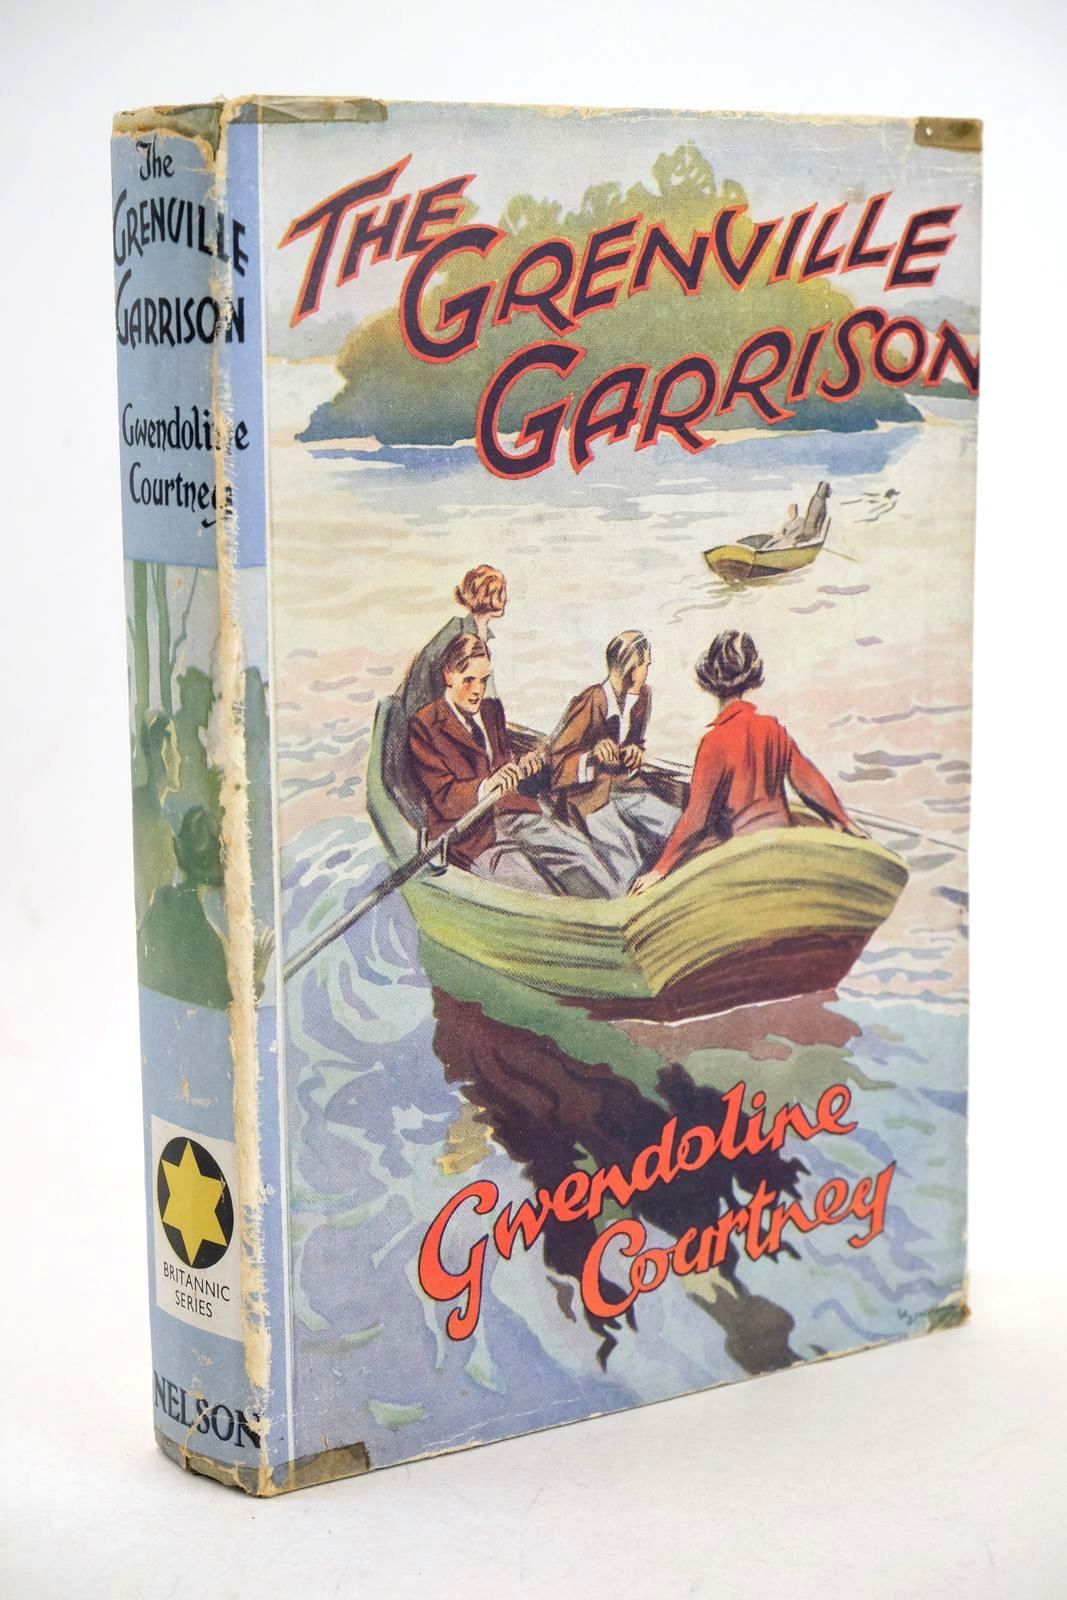 Photo of THE GRENVILLE GARRISON written by Courtney, Gwendoline illustrated by Cable, W. Lindsay published by Thomas Nelson and Sons Ltd. (STOCK CODE: 1326883)  for sale by Stella & Rose's Books